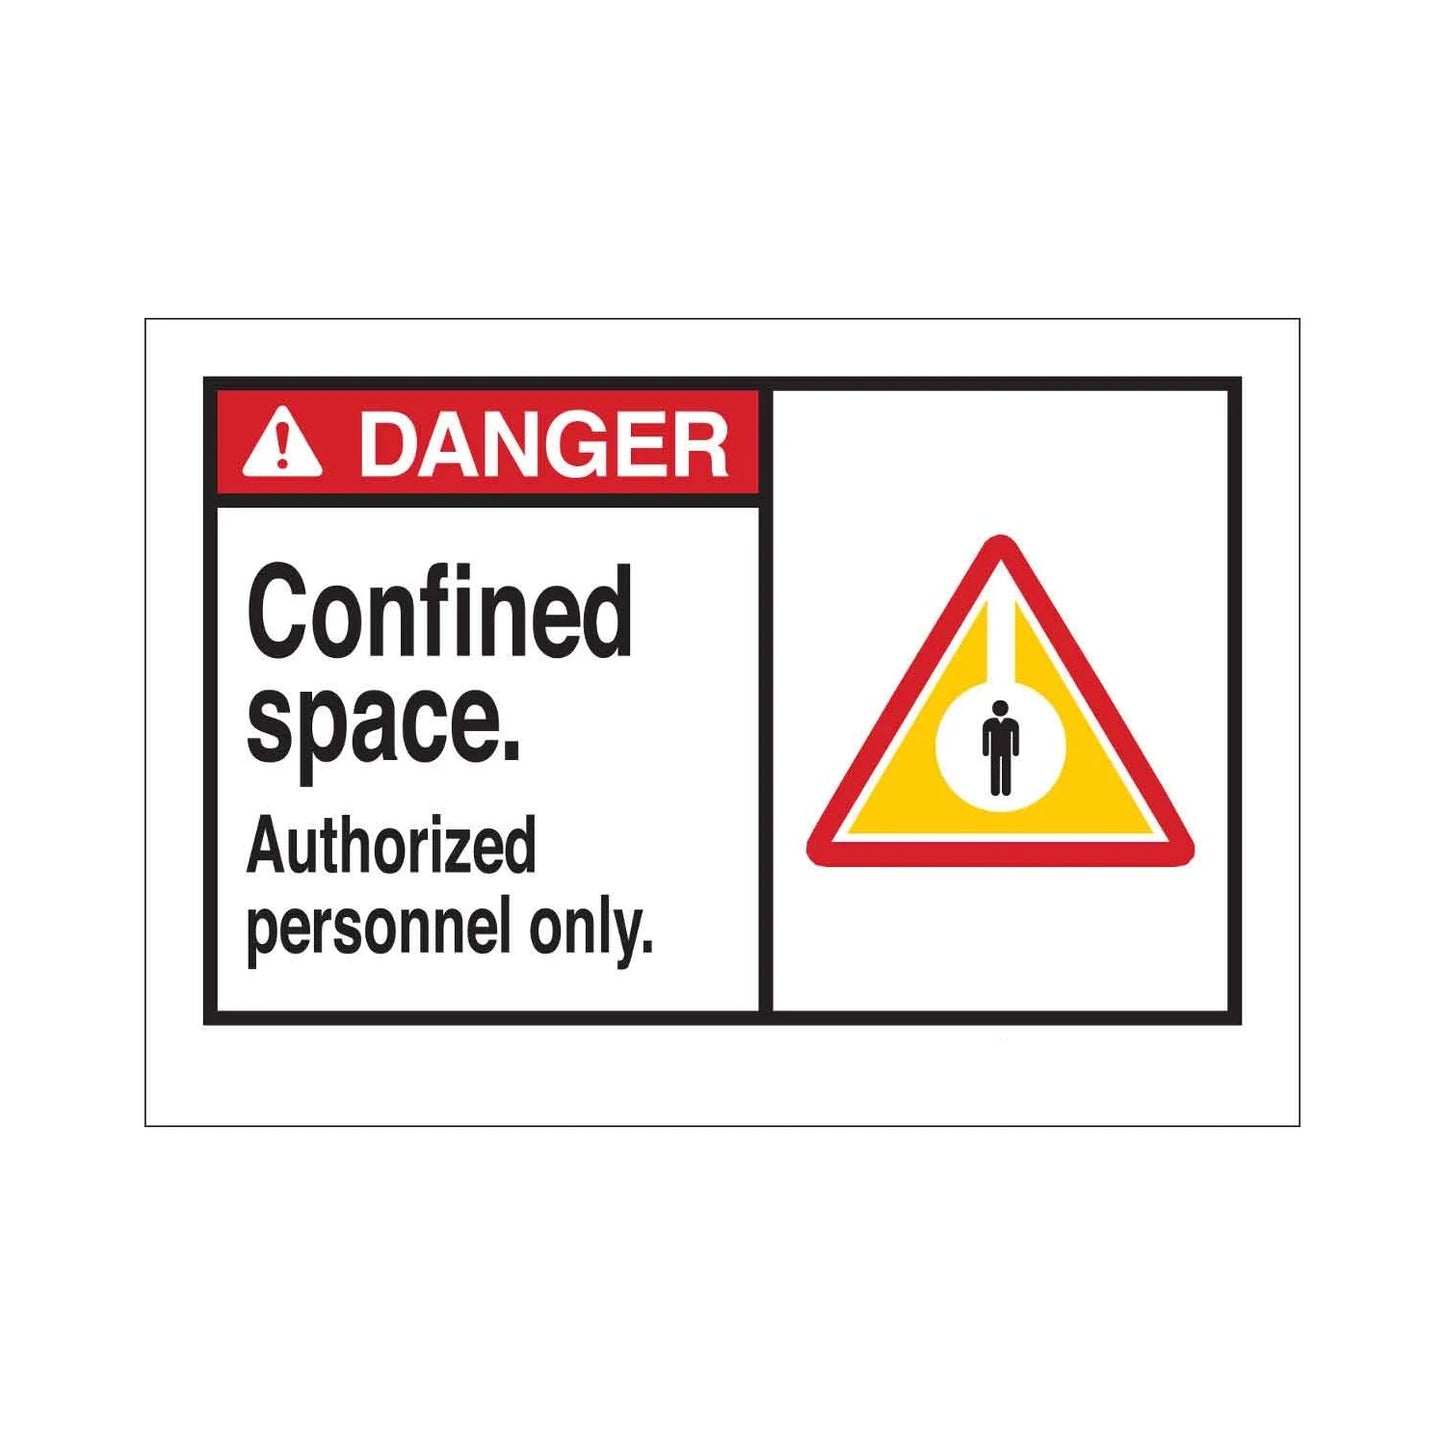 DANGER Confined Space. Authorized Personnel Only. Sign